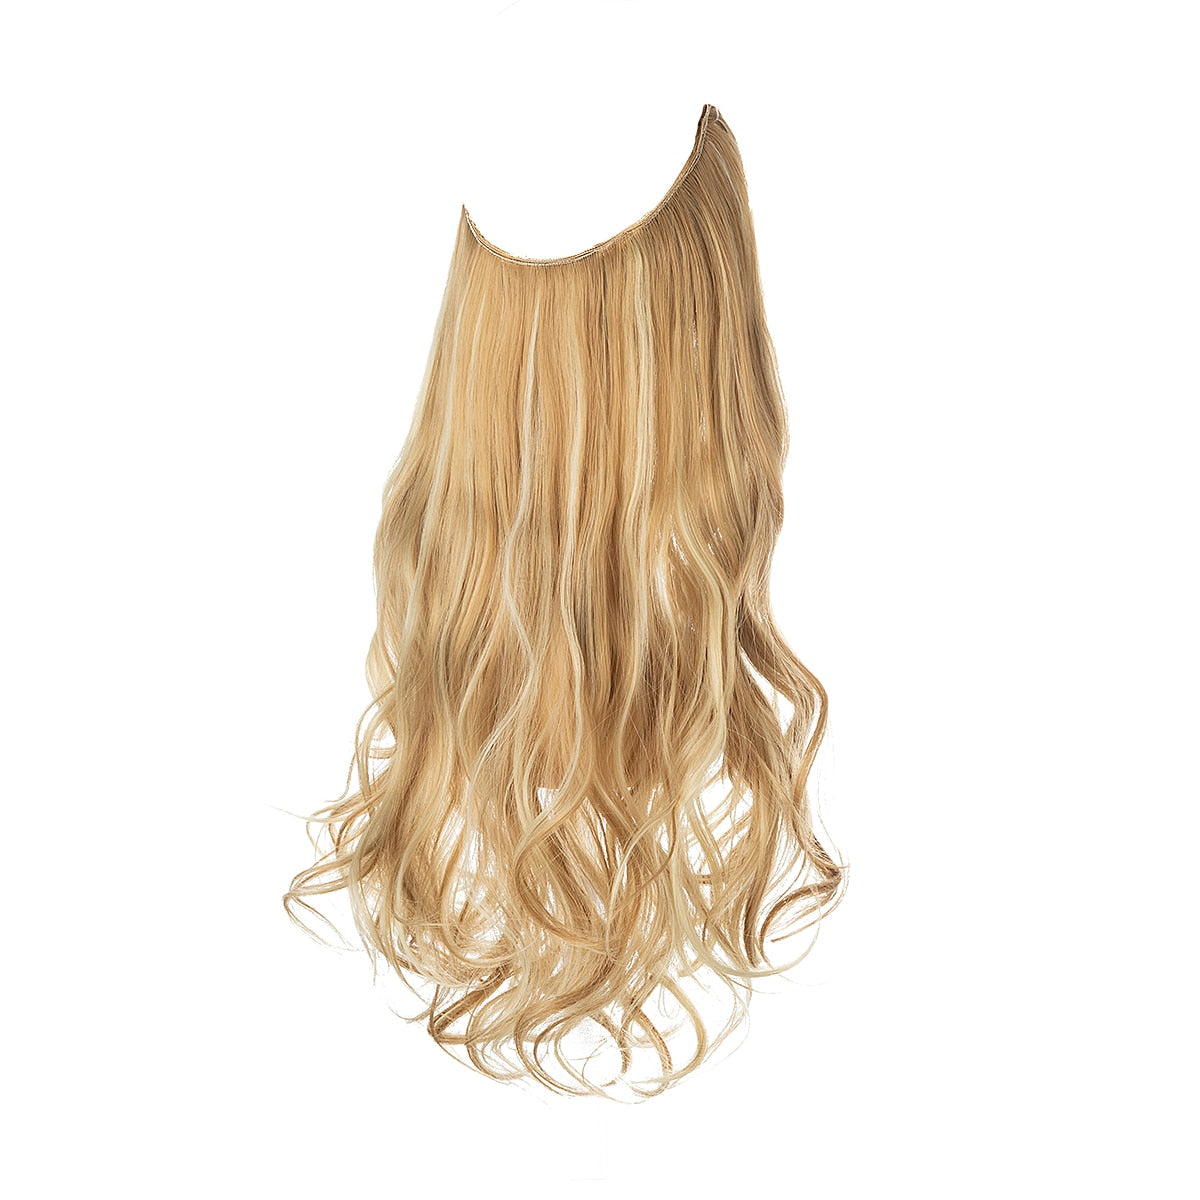 TEEK - Invisible Synth No Clip No Comb Wave Hair Extensions | Blonde Shades HAIR theteekdotcom Golden Beach Blonde 14inches 20-22 days